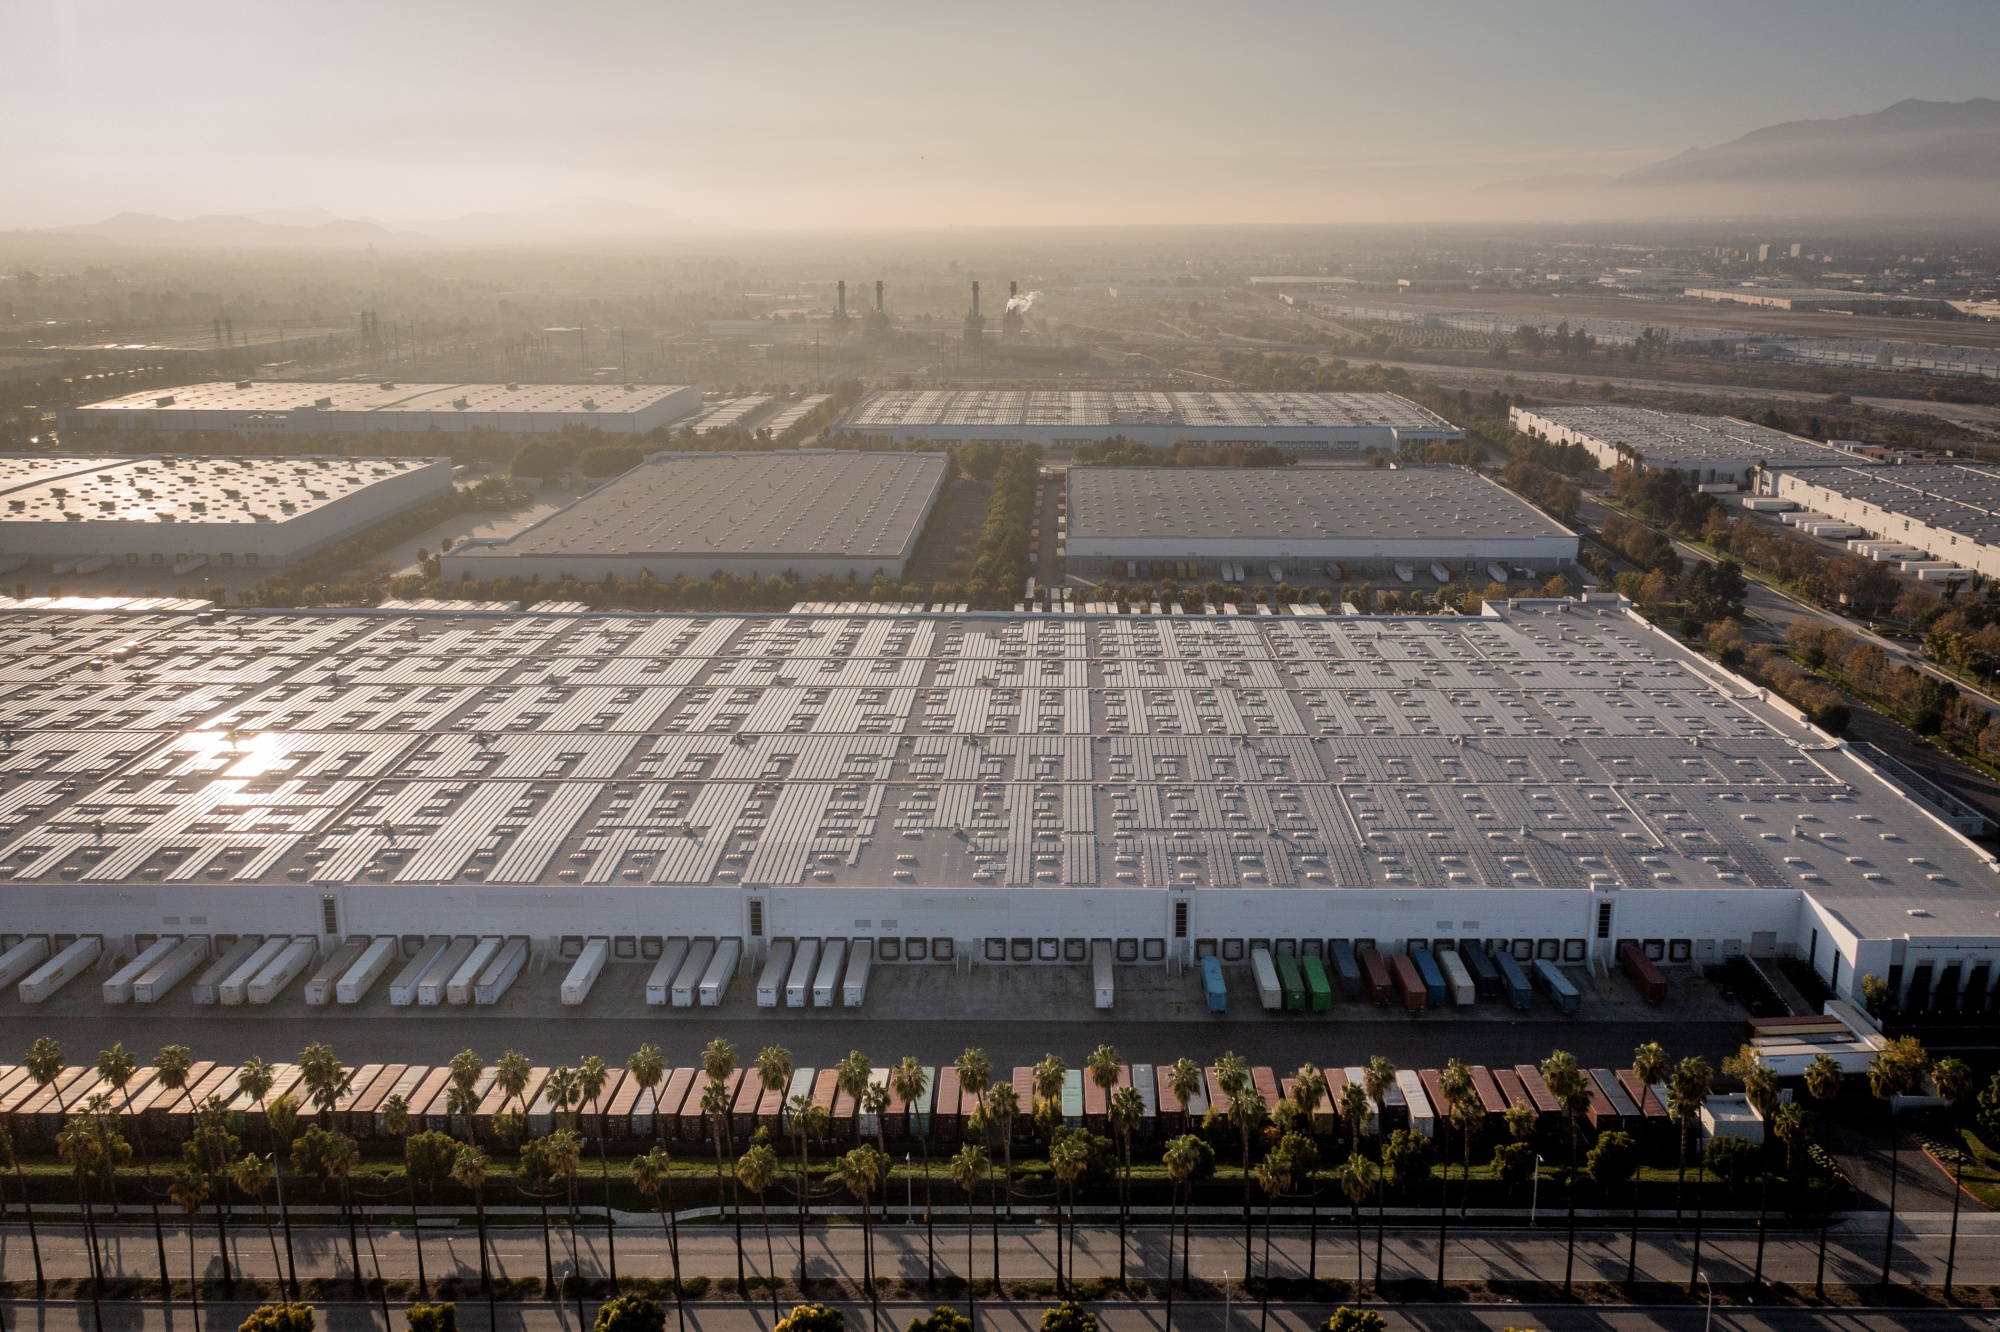 Inland Empire is warehouse central, but how did it happen? – Press